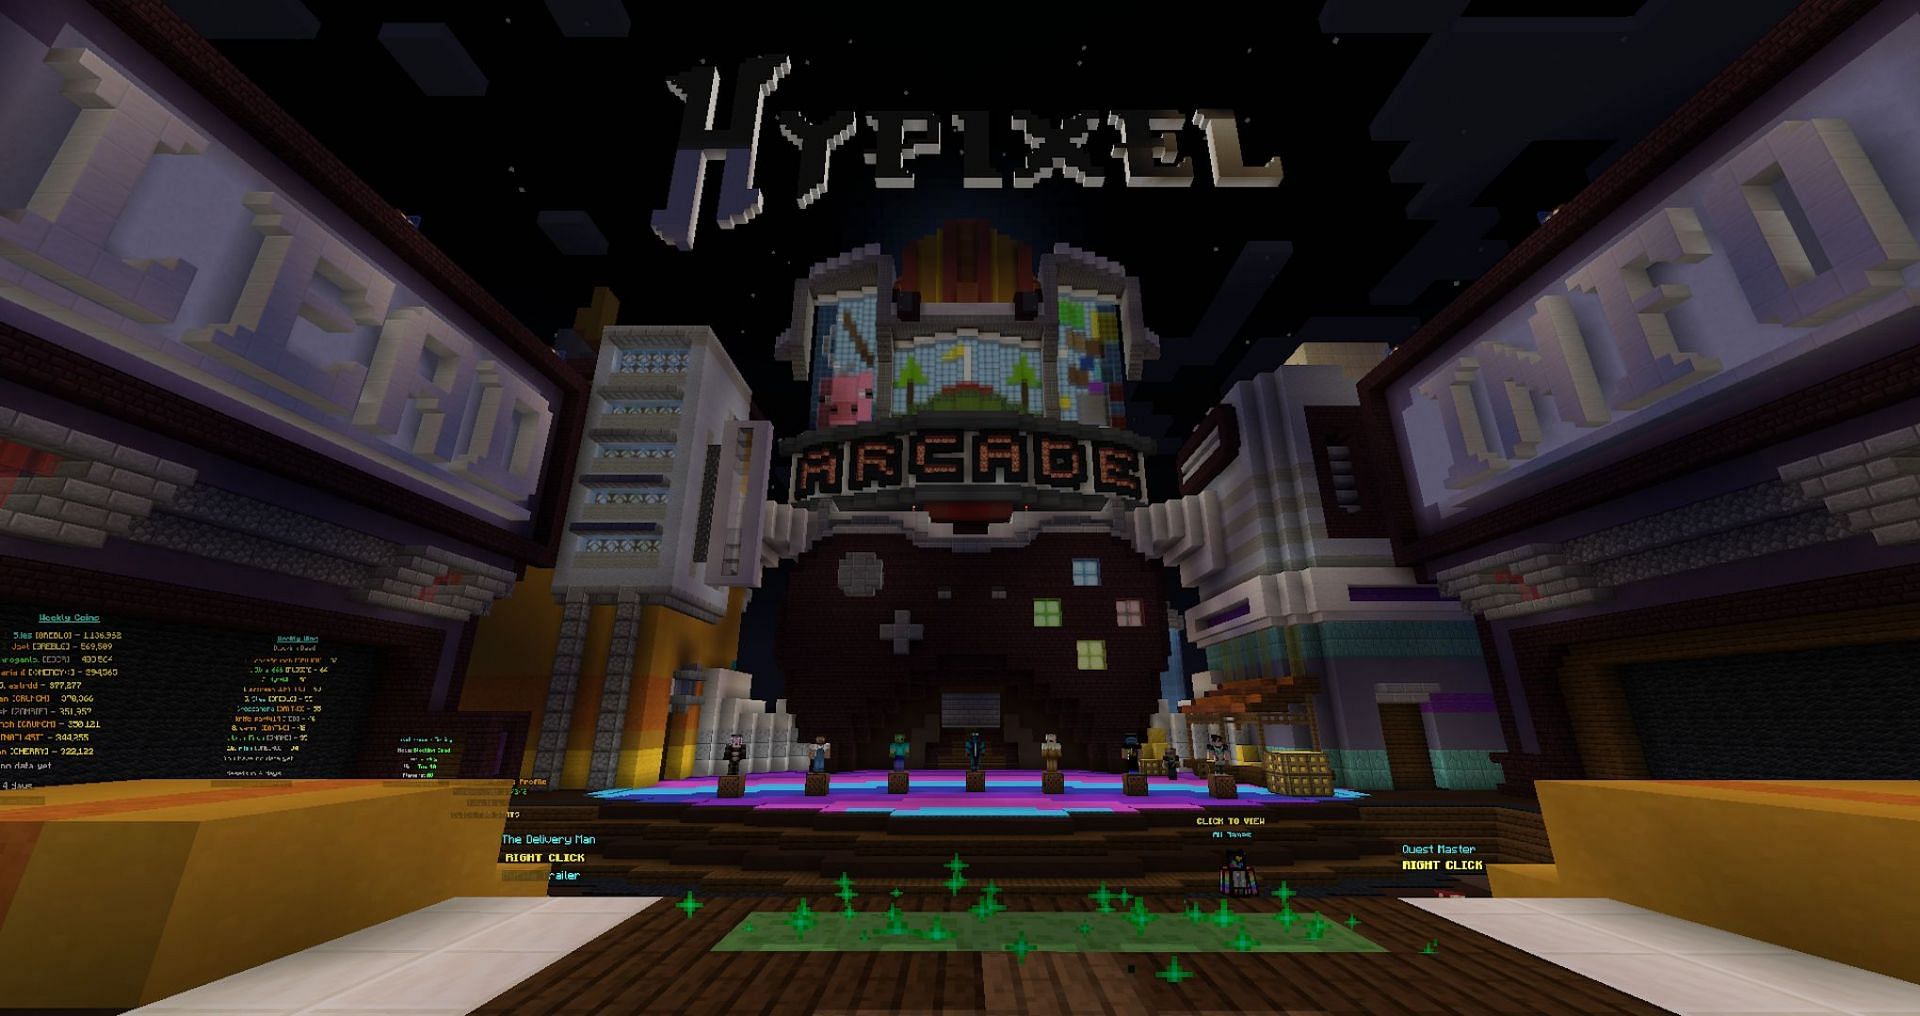 Hypixel also has its own version of hunger games called Blitz Survival Games (Image via Mojang)